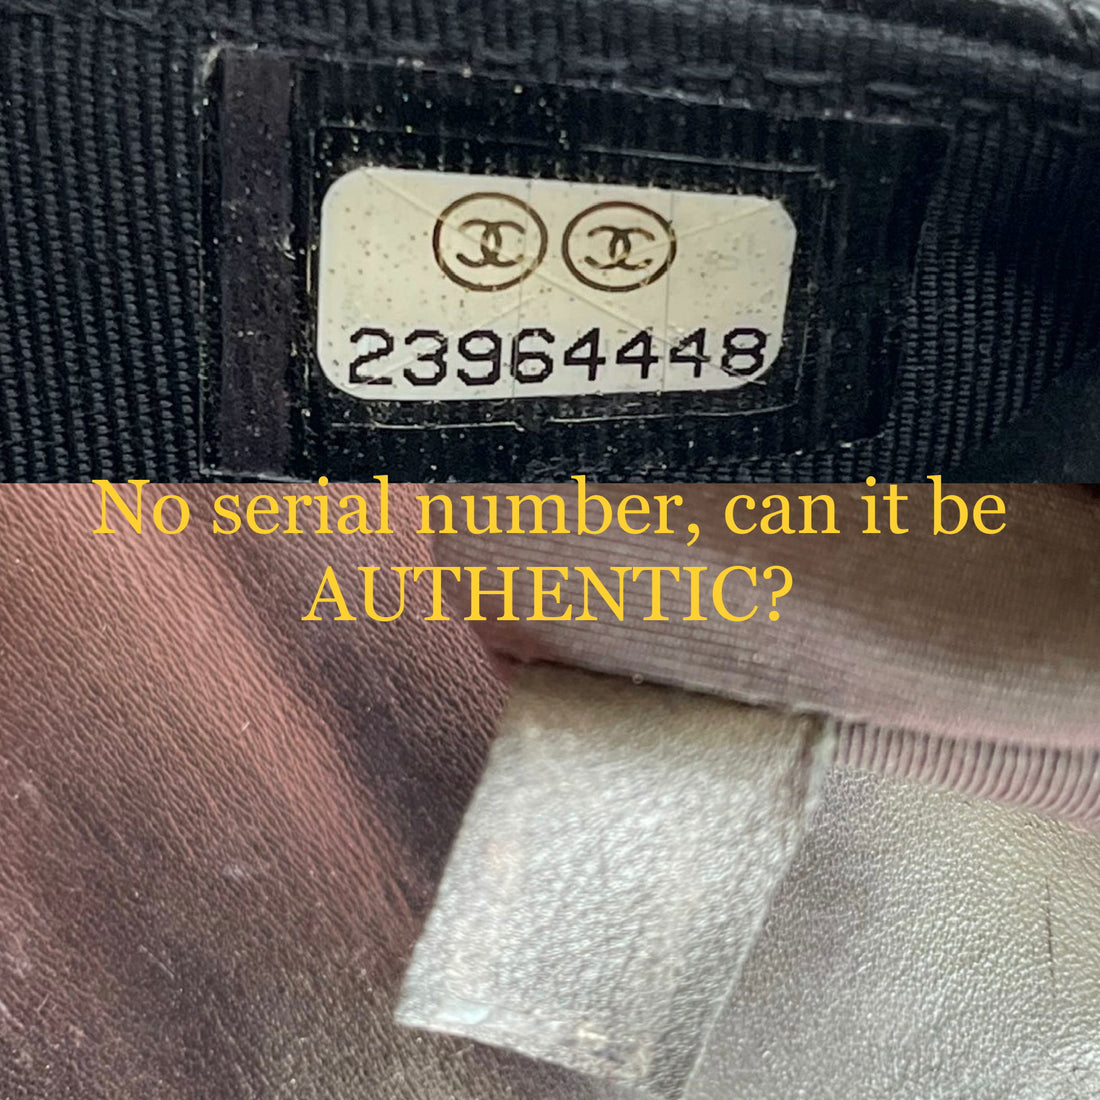 Chanel Authentication even without a serial number